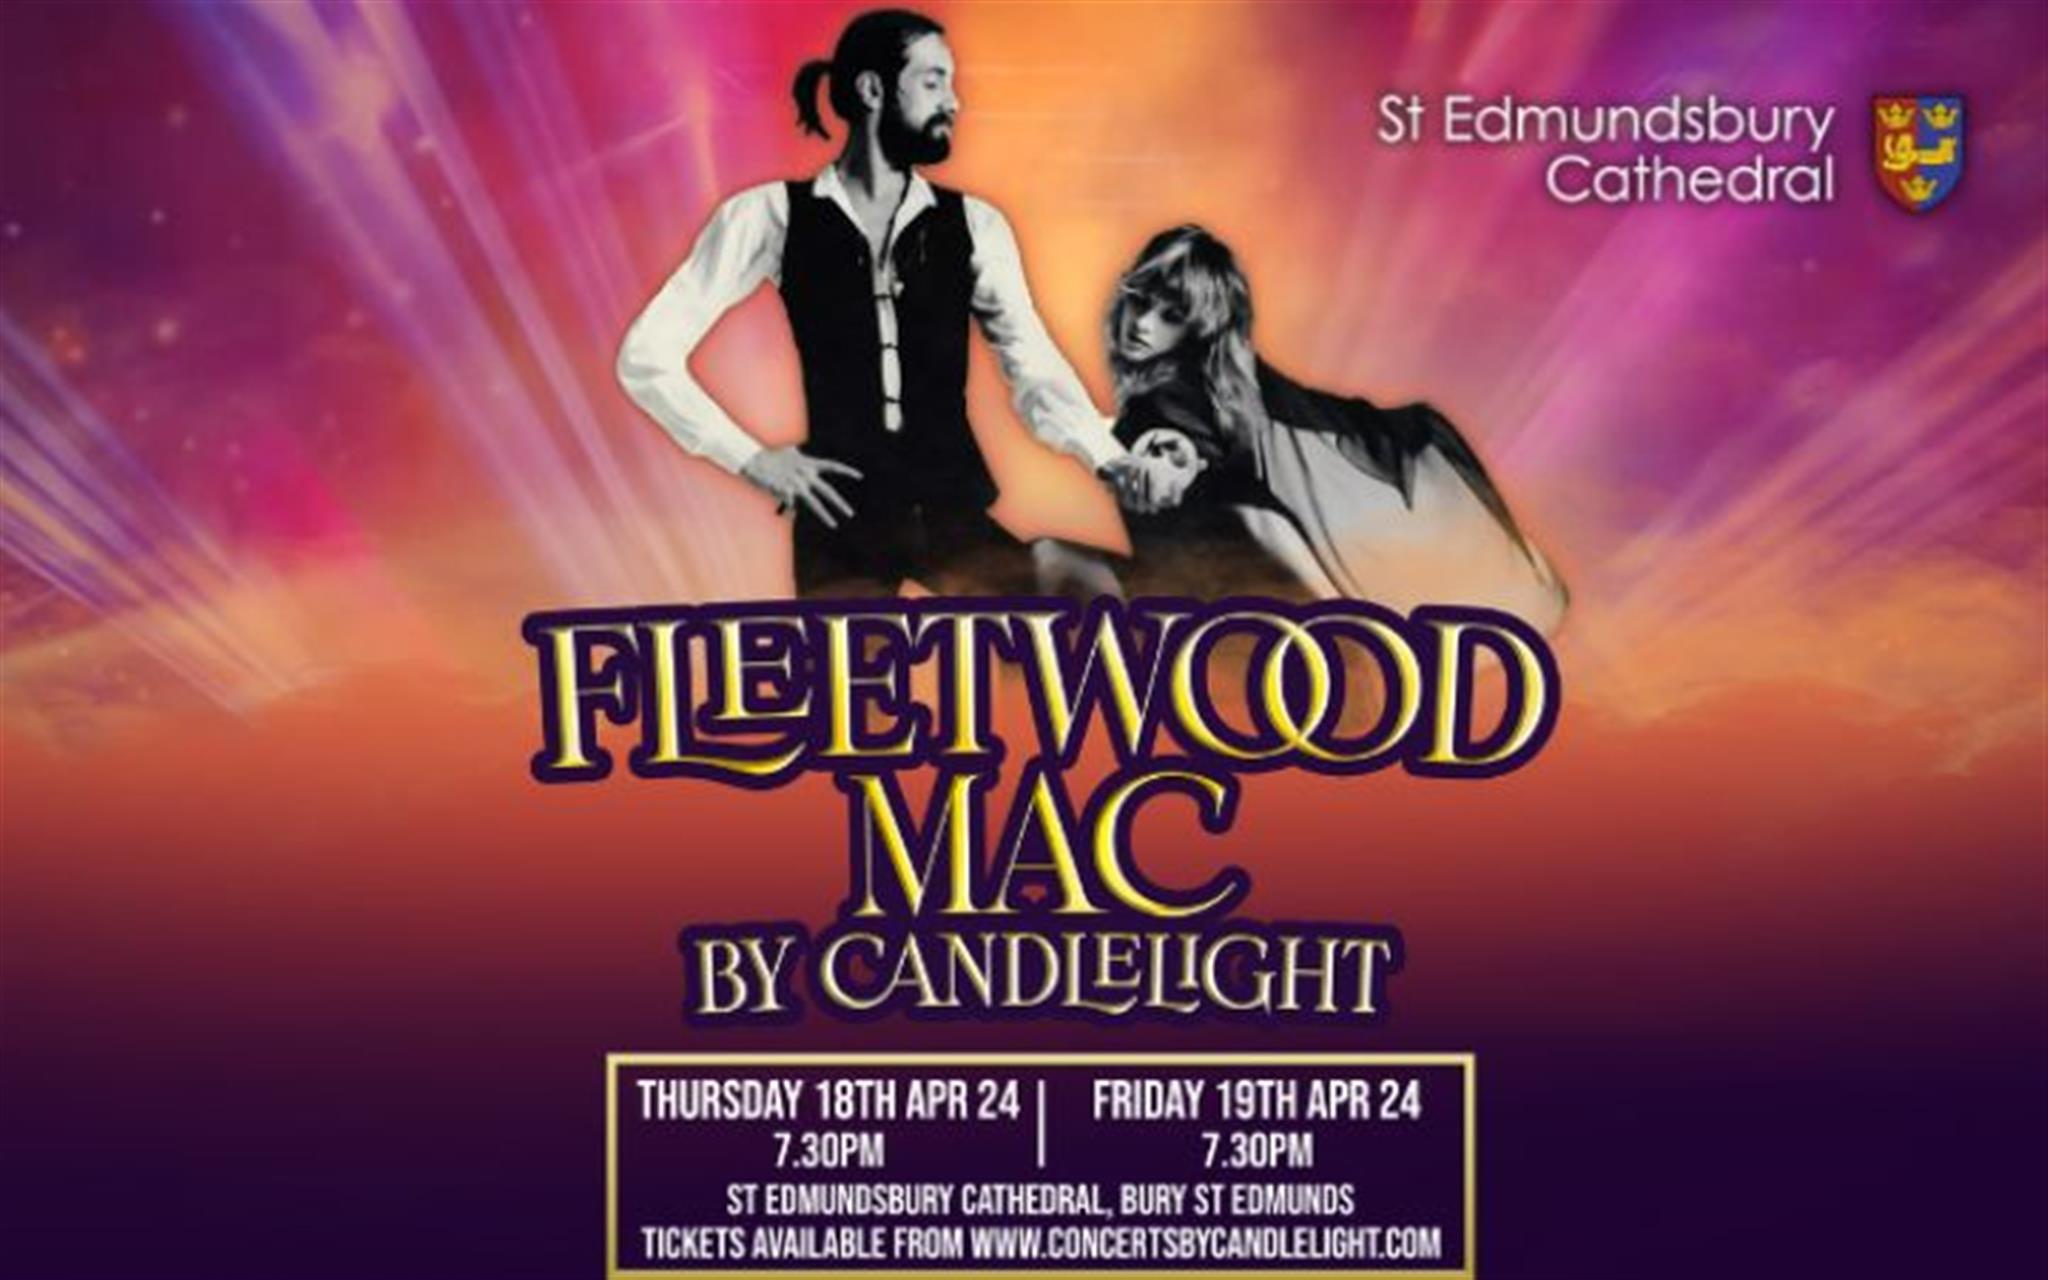 Fleetwood Mac by Candelight at St Edmundsbury Cathedral